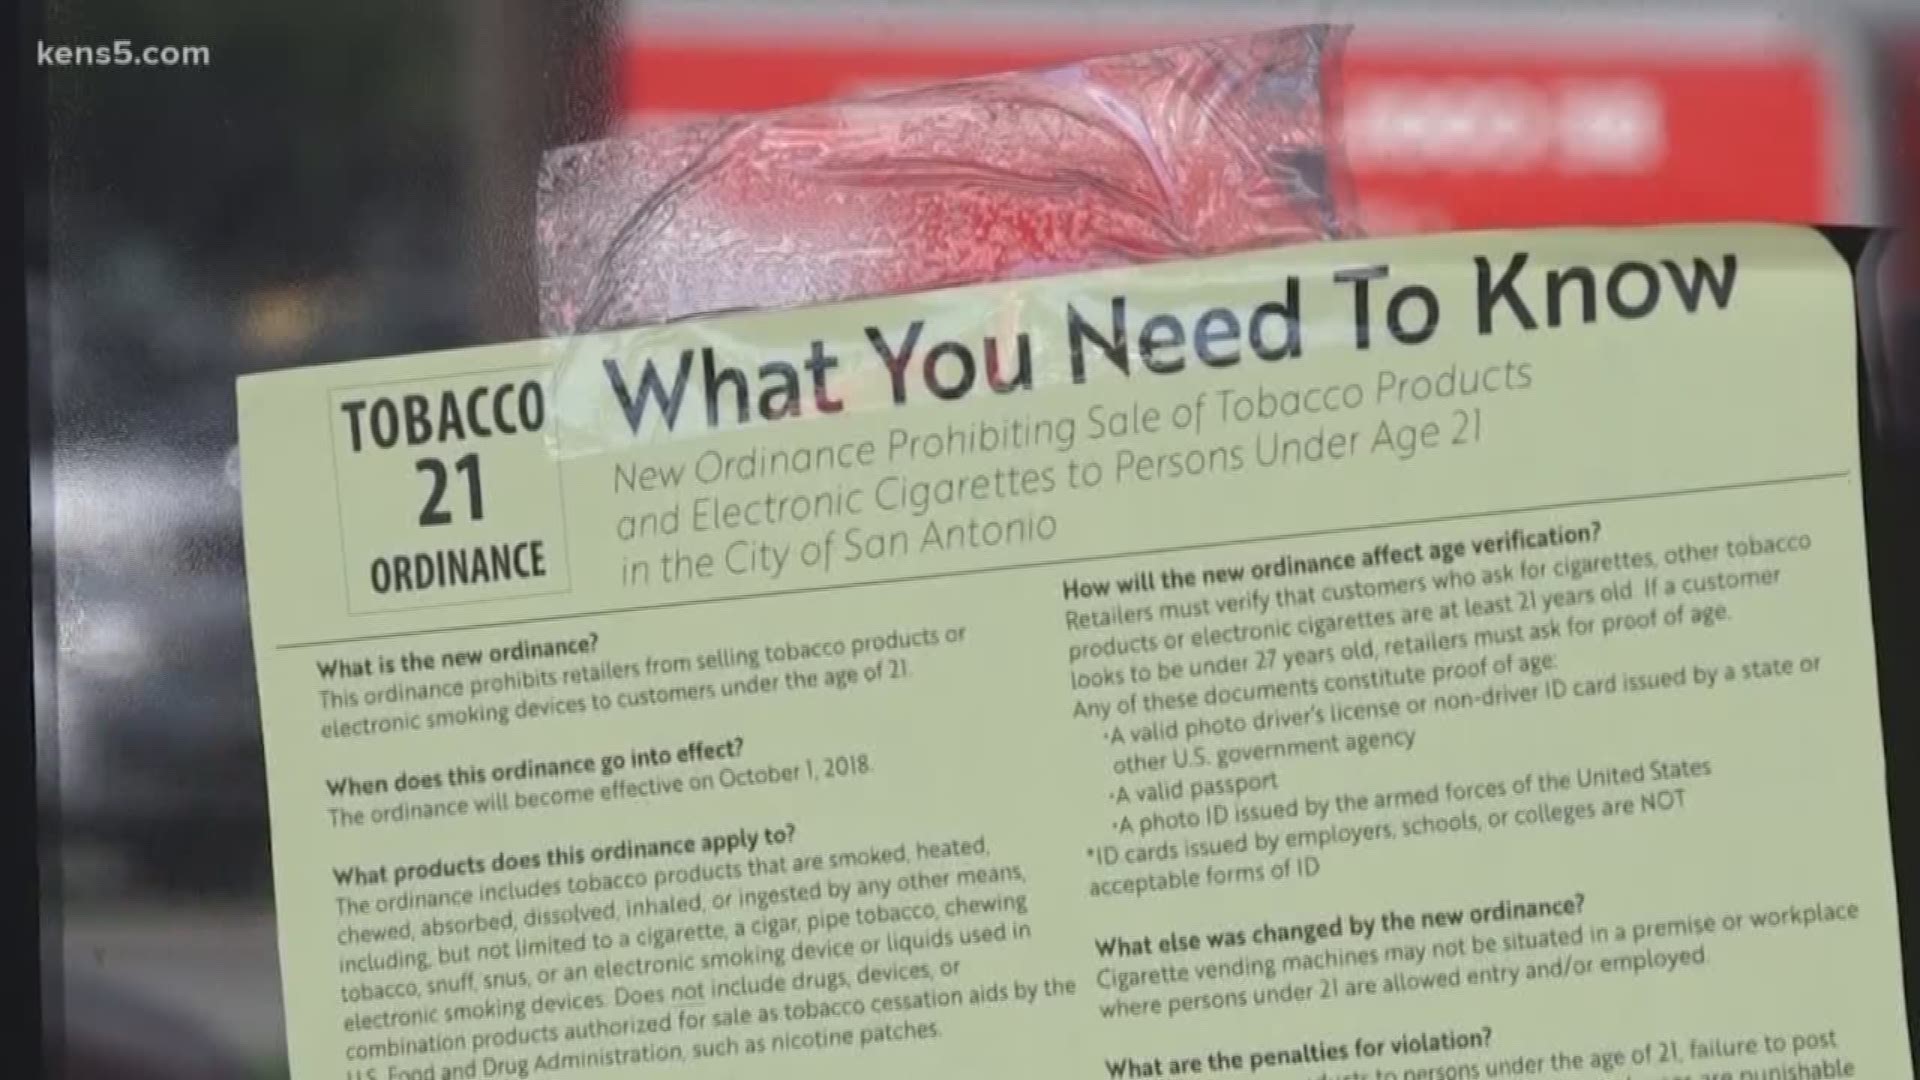 Starting October 1, residents of San Antonio will have to be 21 or older to purchase tobacco products.